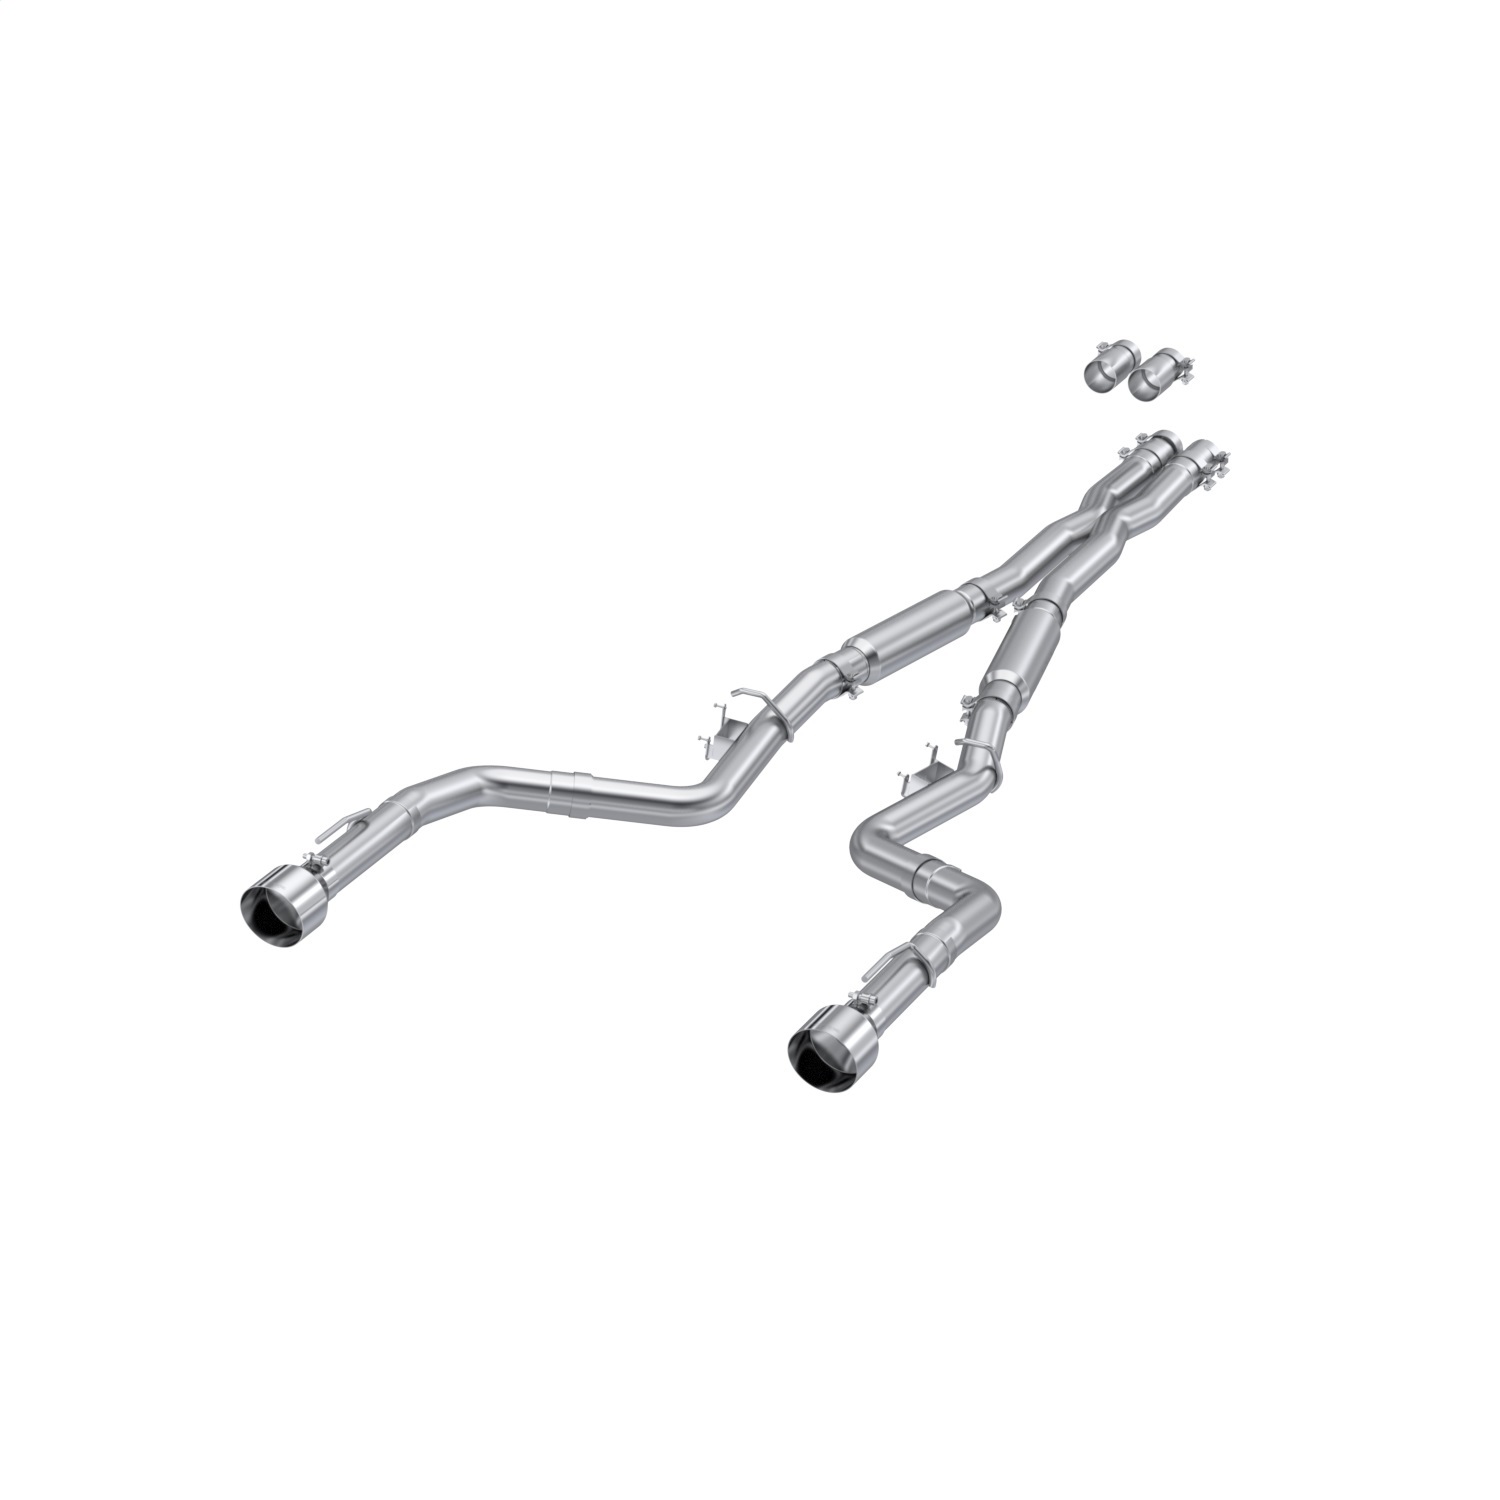 MBRP Exhaust S7117AL Armor Lite Cat Back Performance Exhaust System Fits Charger